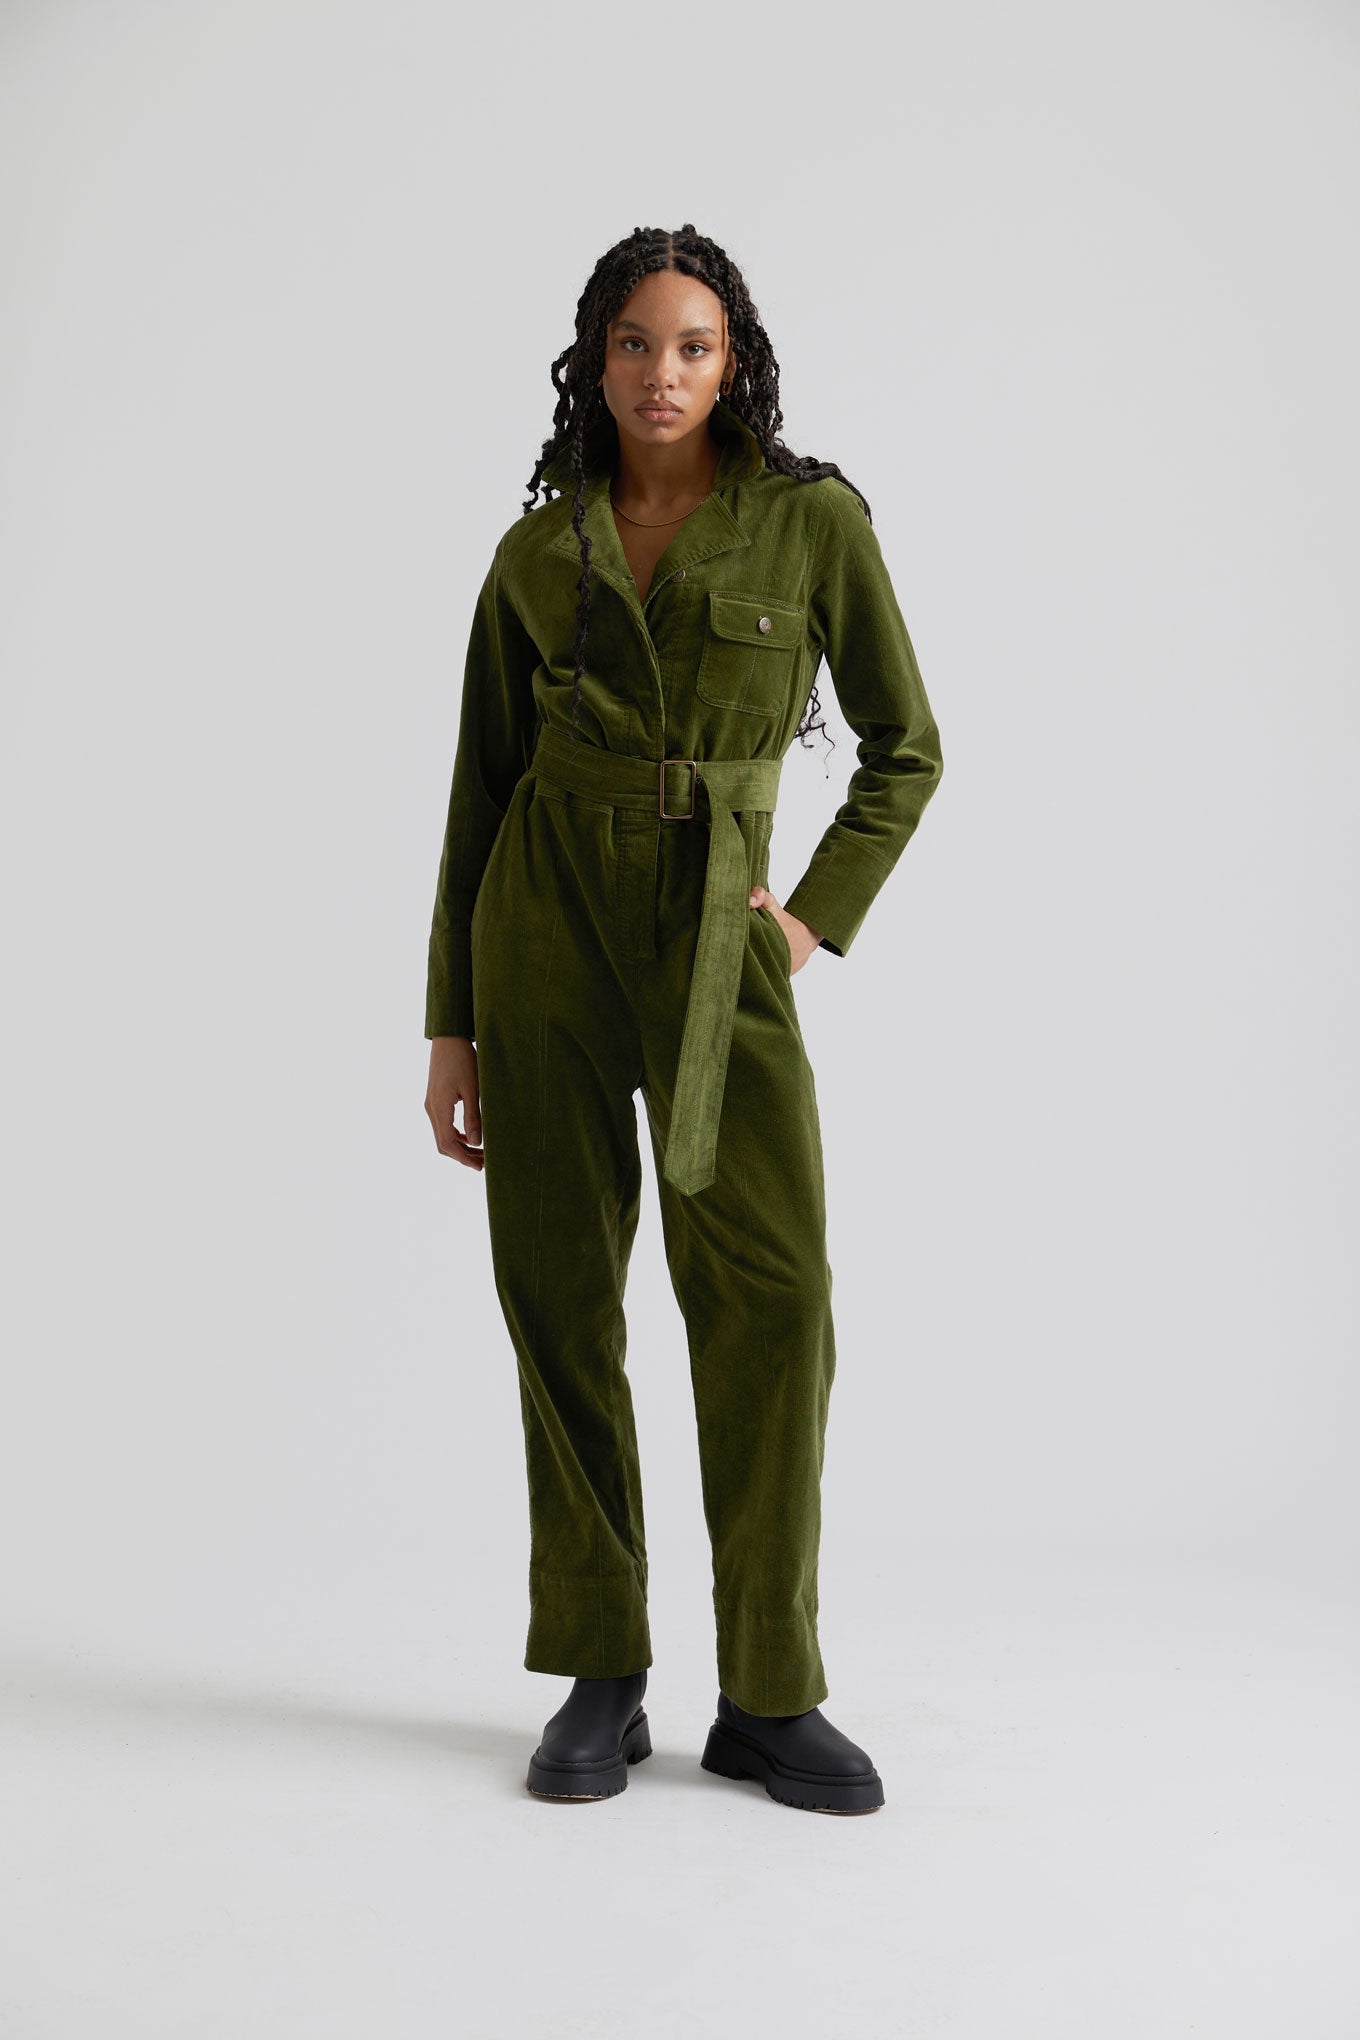 Green corduroy jumpsuit ELECTRA made from organic cotton by Komodo